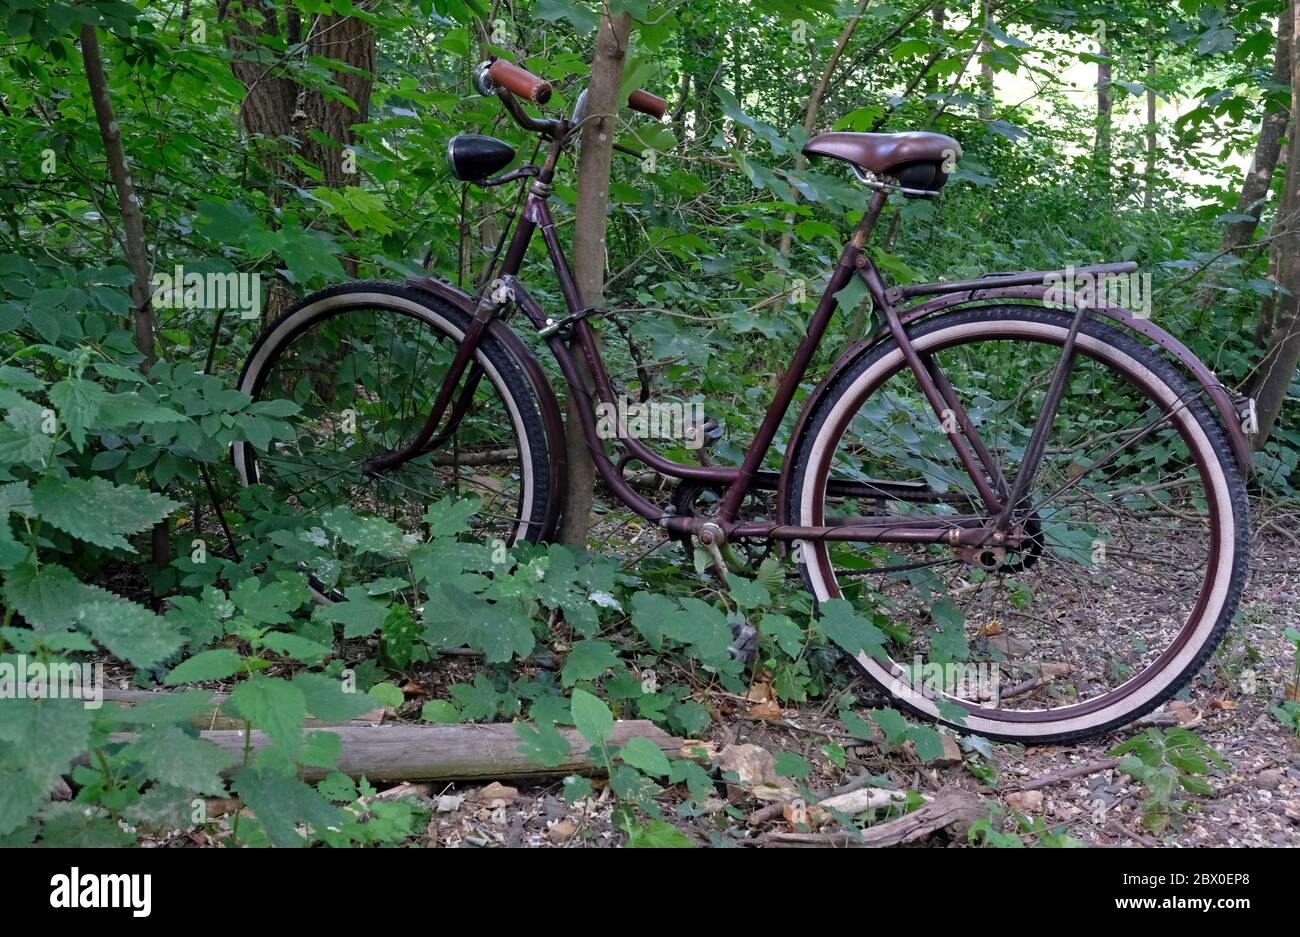 Abandoned bicycle in a forest Stock Photo